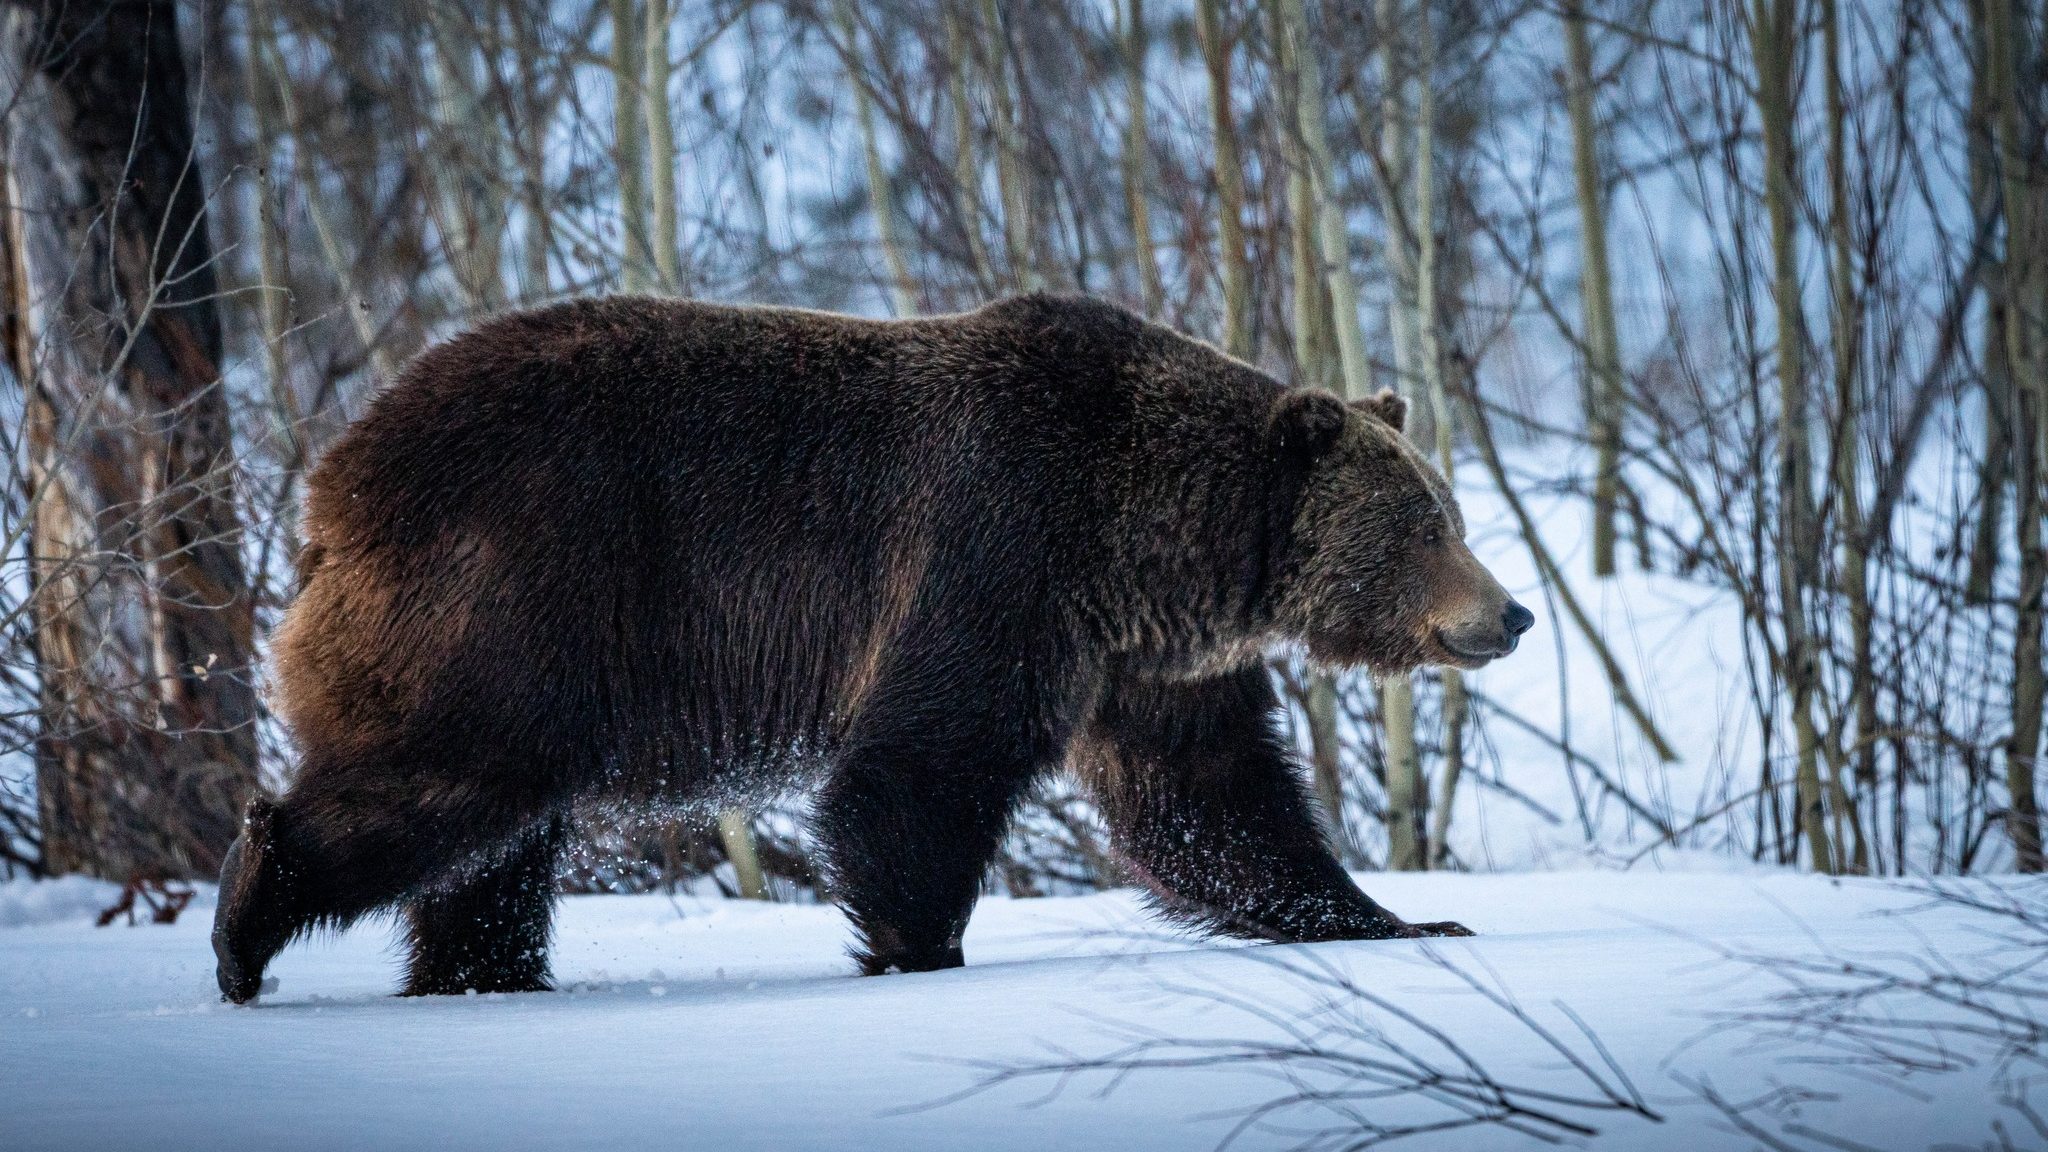 The Grand Teton National Park reported its first grizzly bear sighting of 2022 on Sunday, March 13....